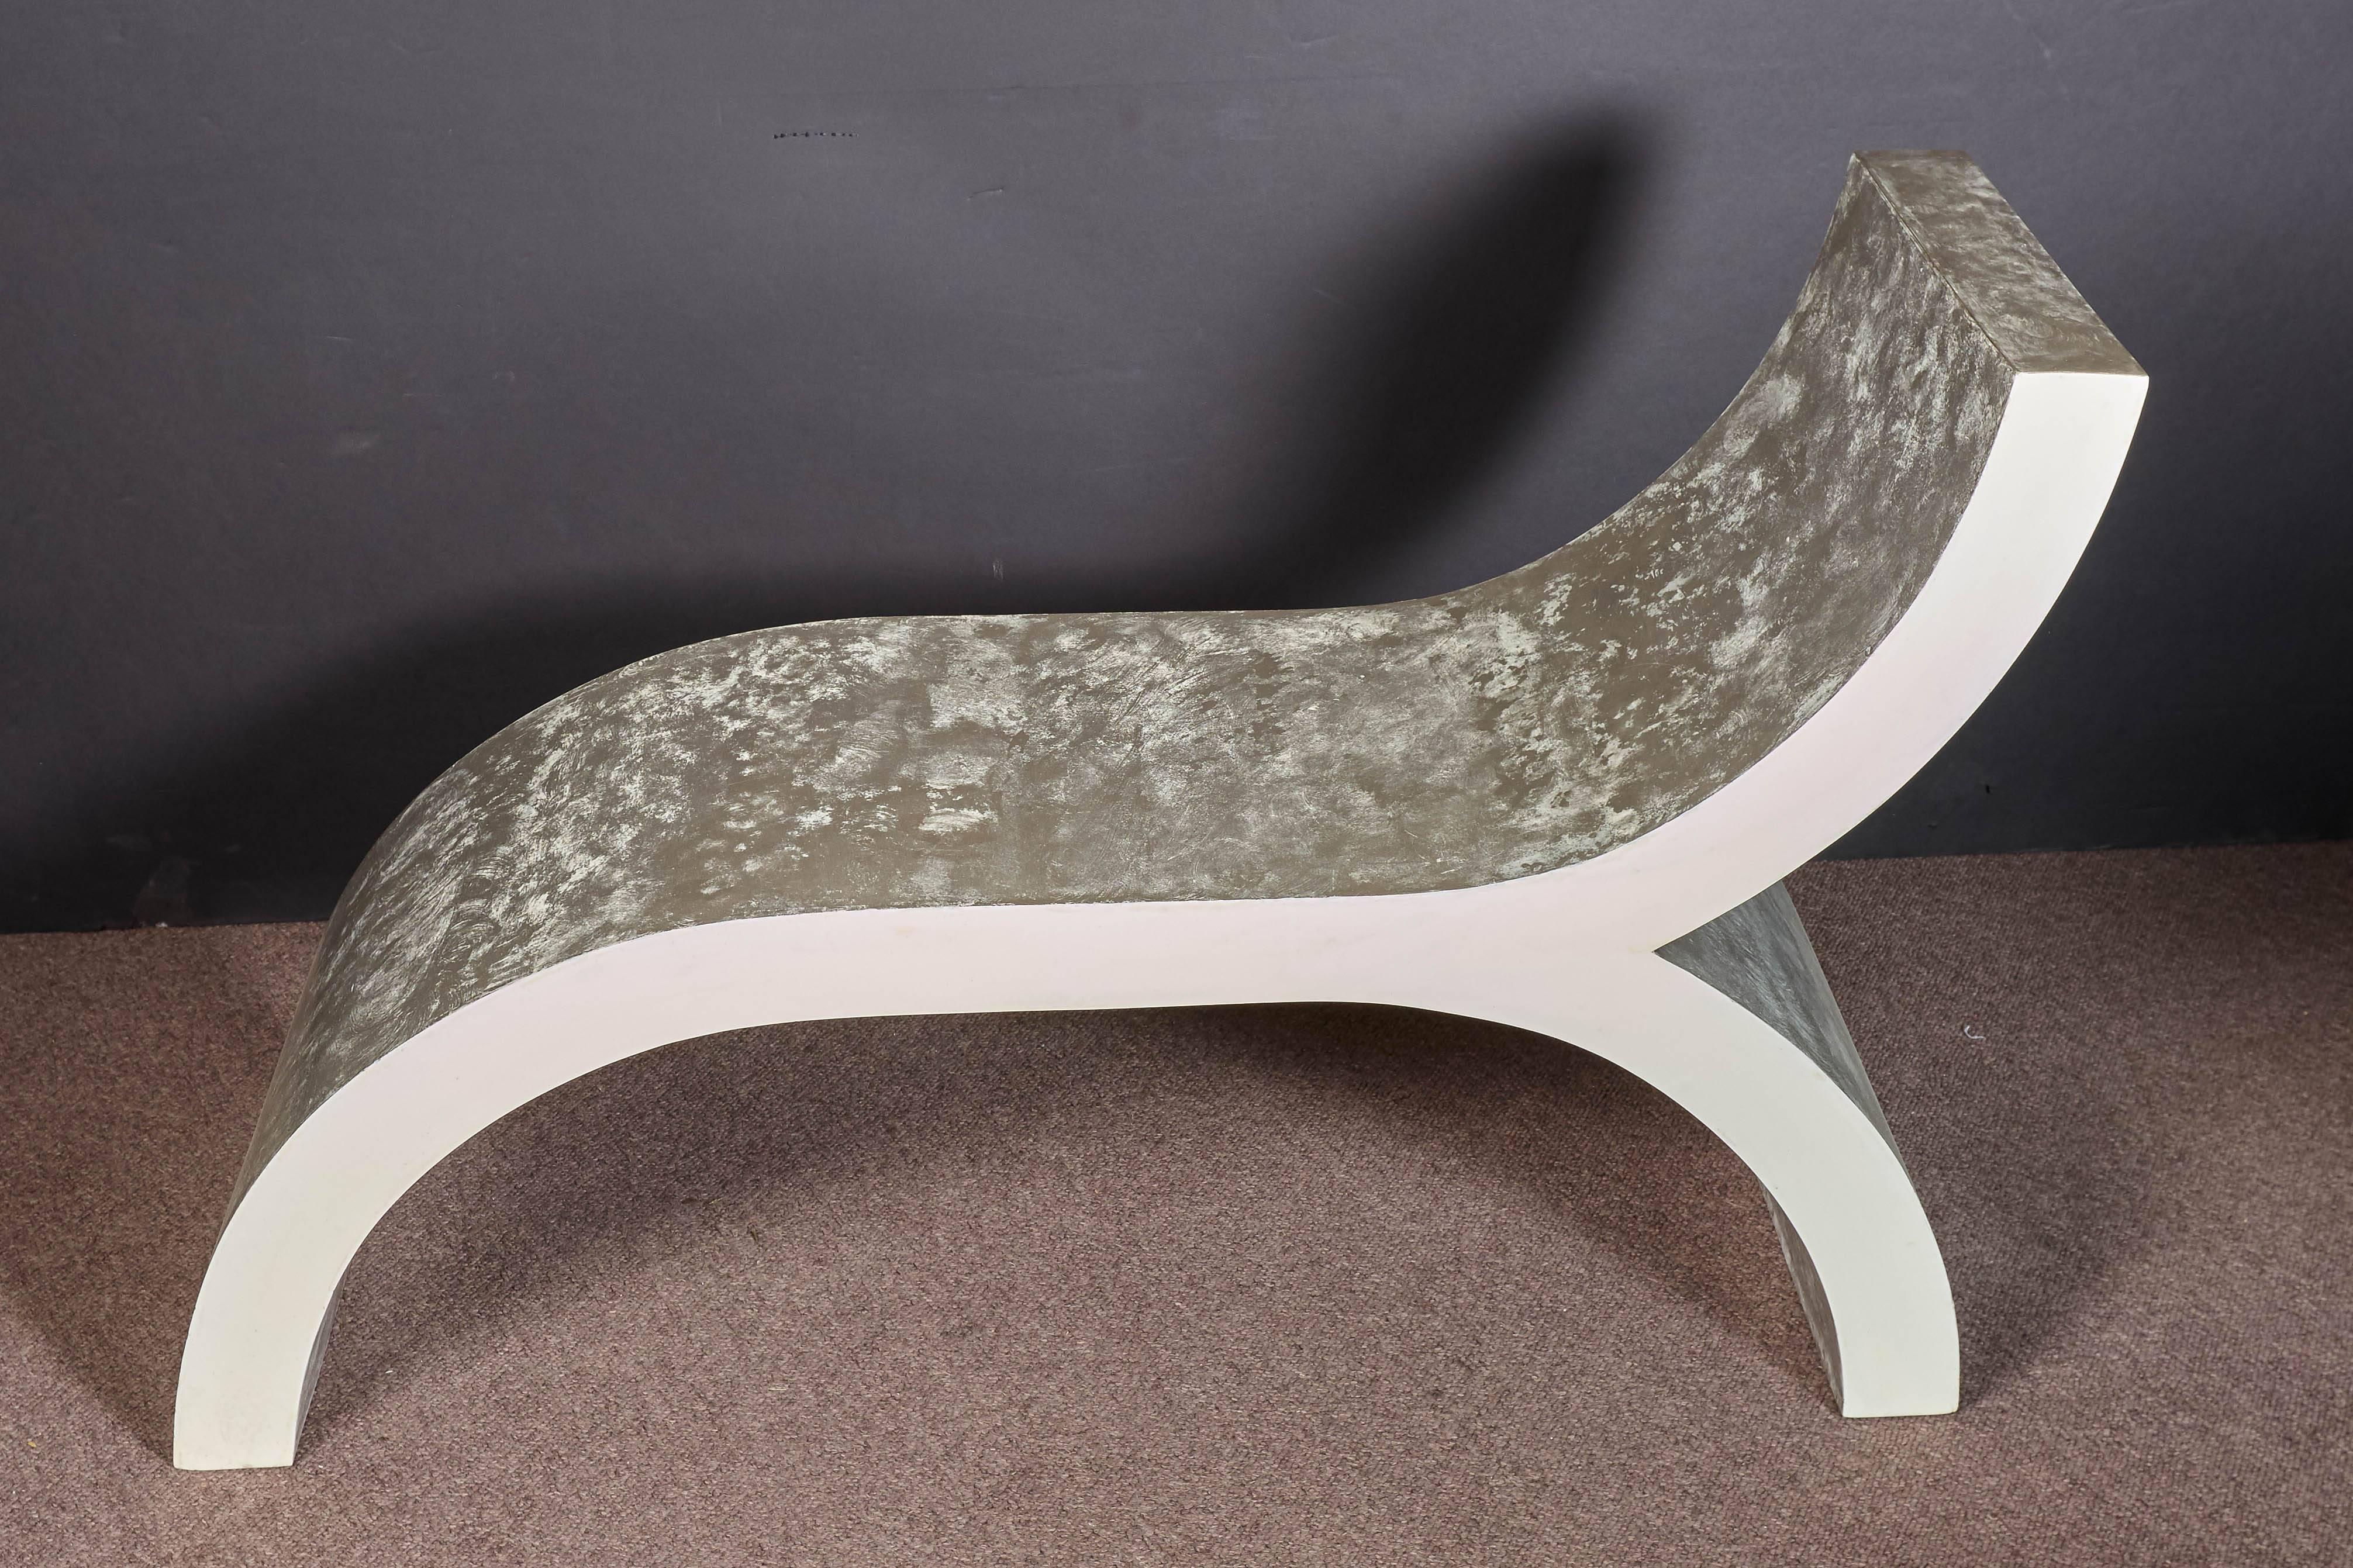 A fabulous and unusual curvilinear, abstract designed Modernist bench, recamier, daybed, chair, stool in white lacquer with cloud like patterns in silver. The color of the finish is a creamy white lacquer with warm satin platinum -silver